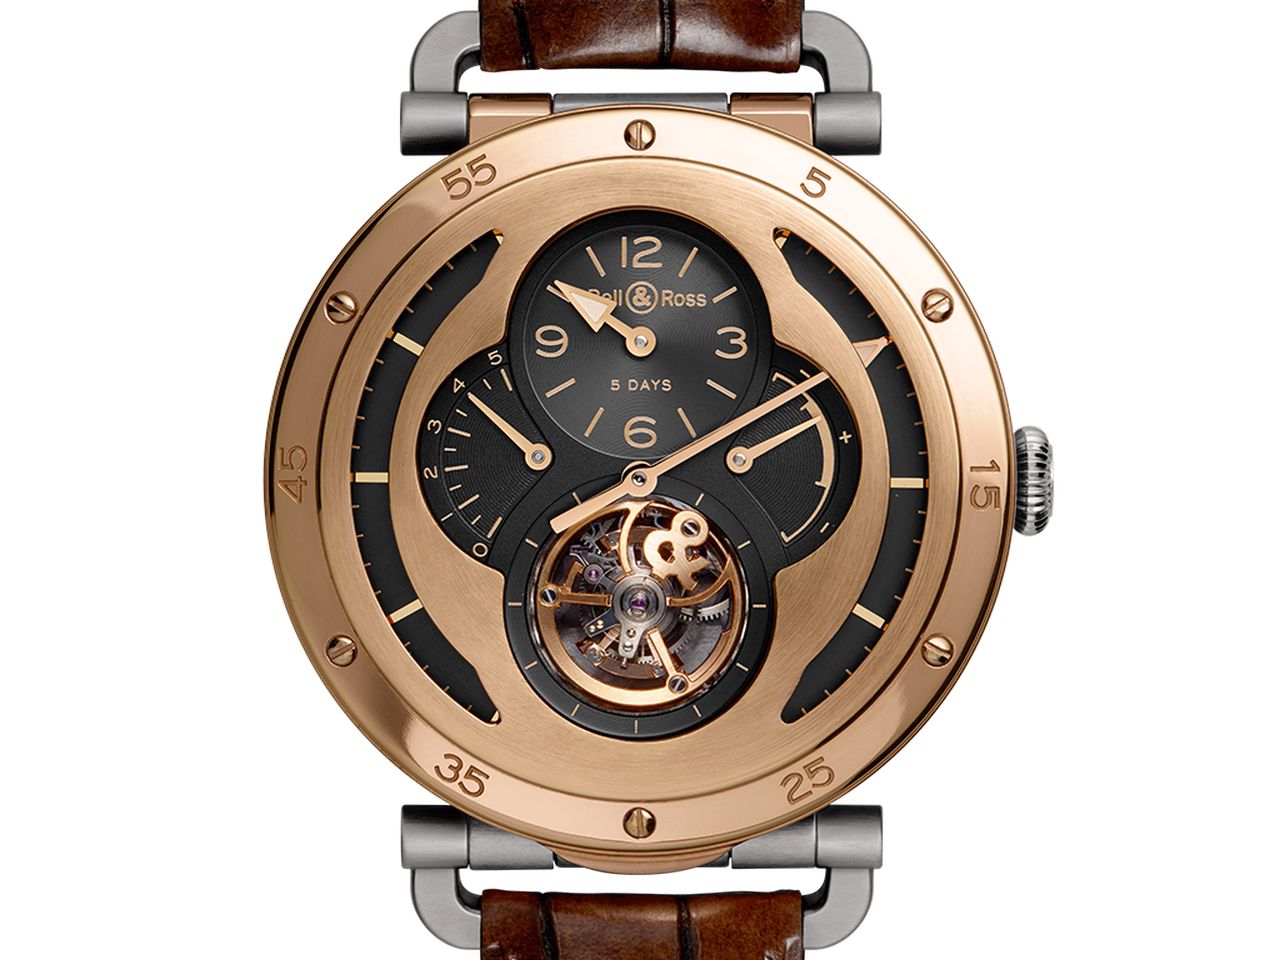 bell-ross-ww2-military-tourbillon-red-gold-limited-edition-prezzo-price_0-100